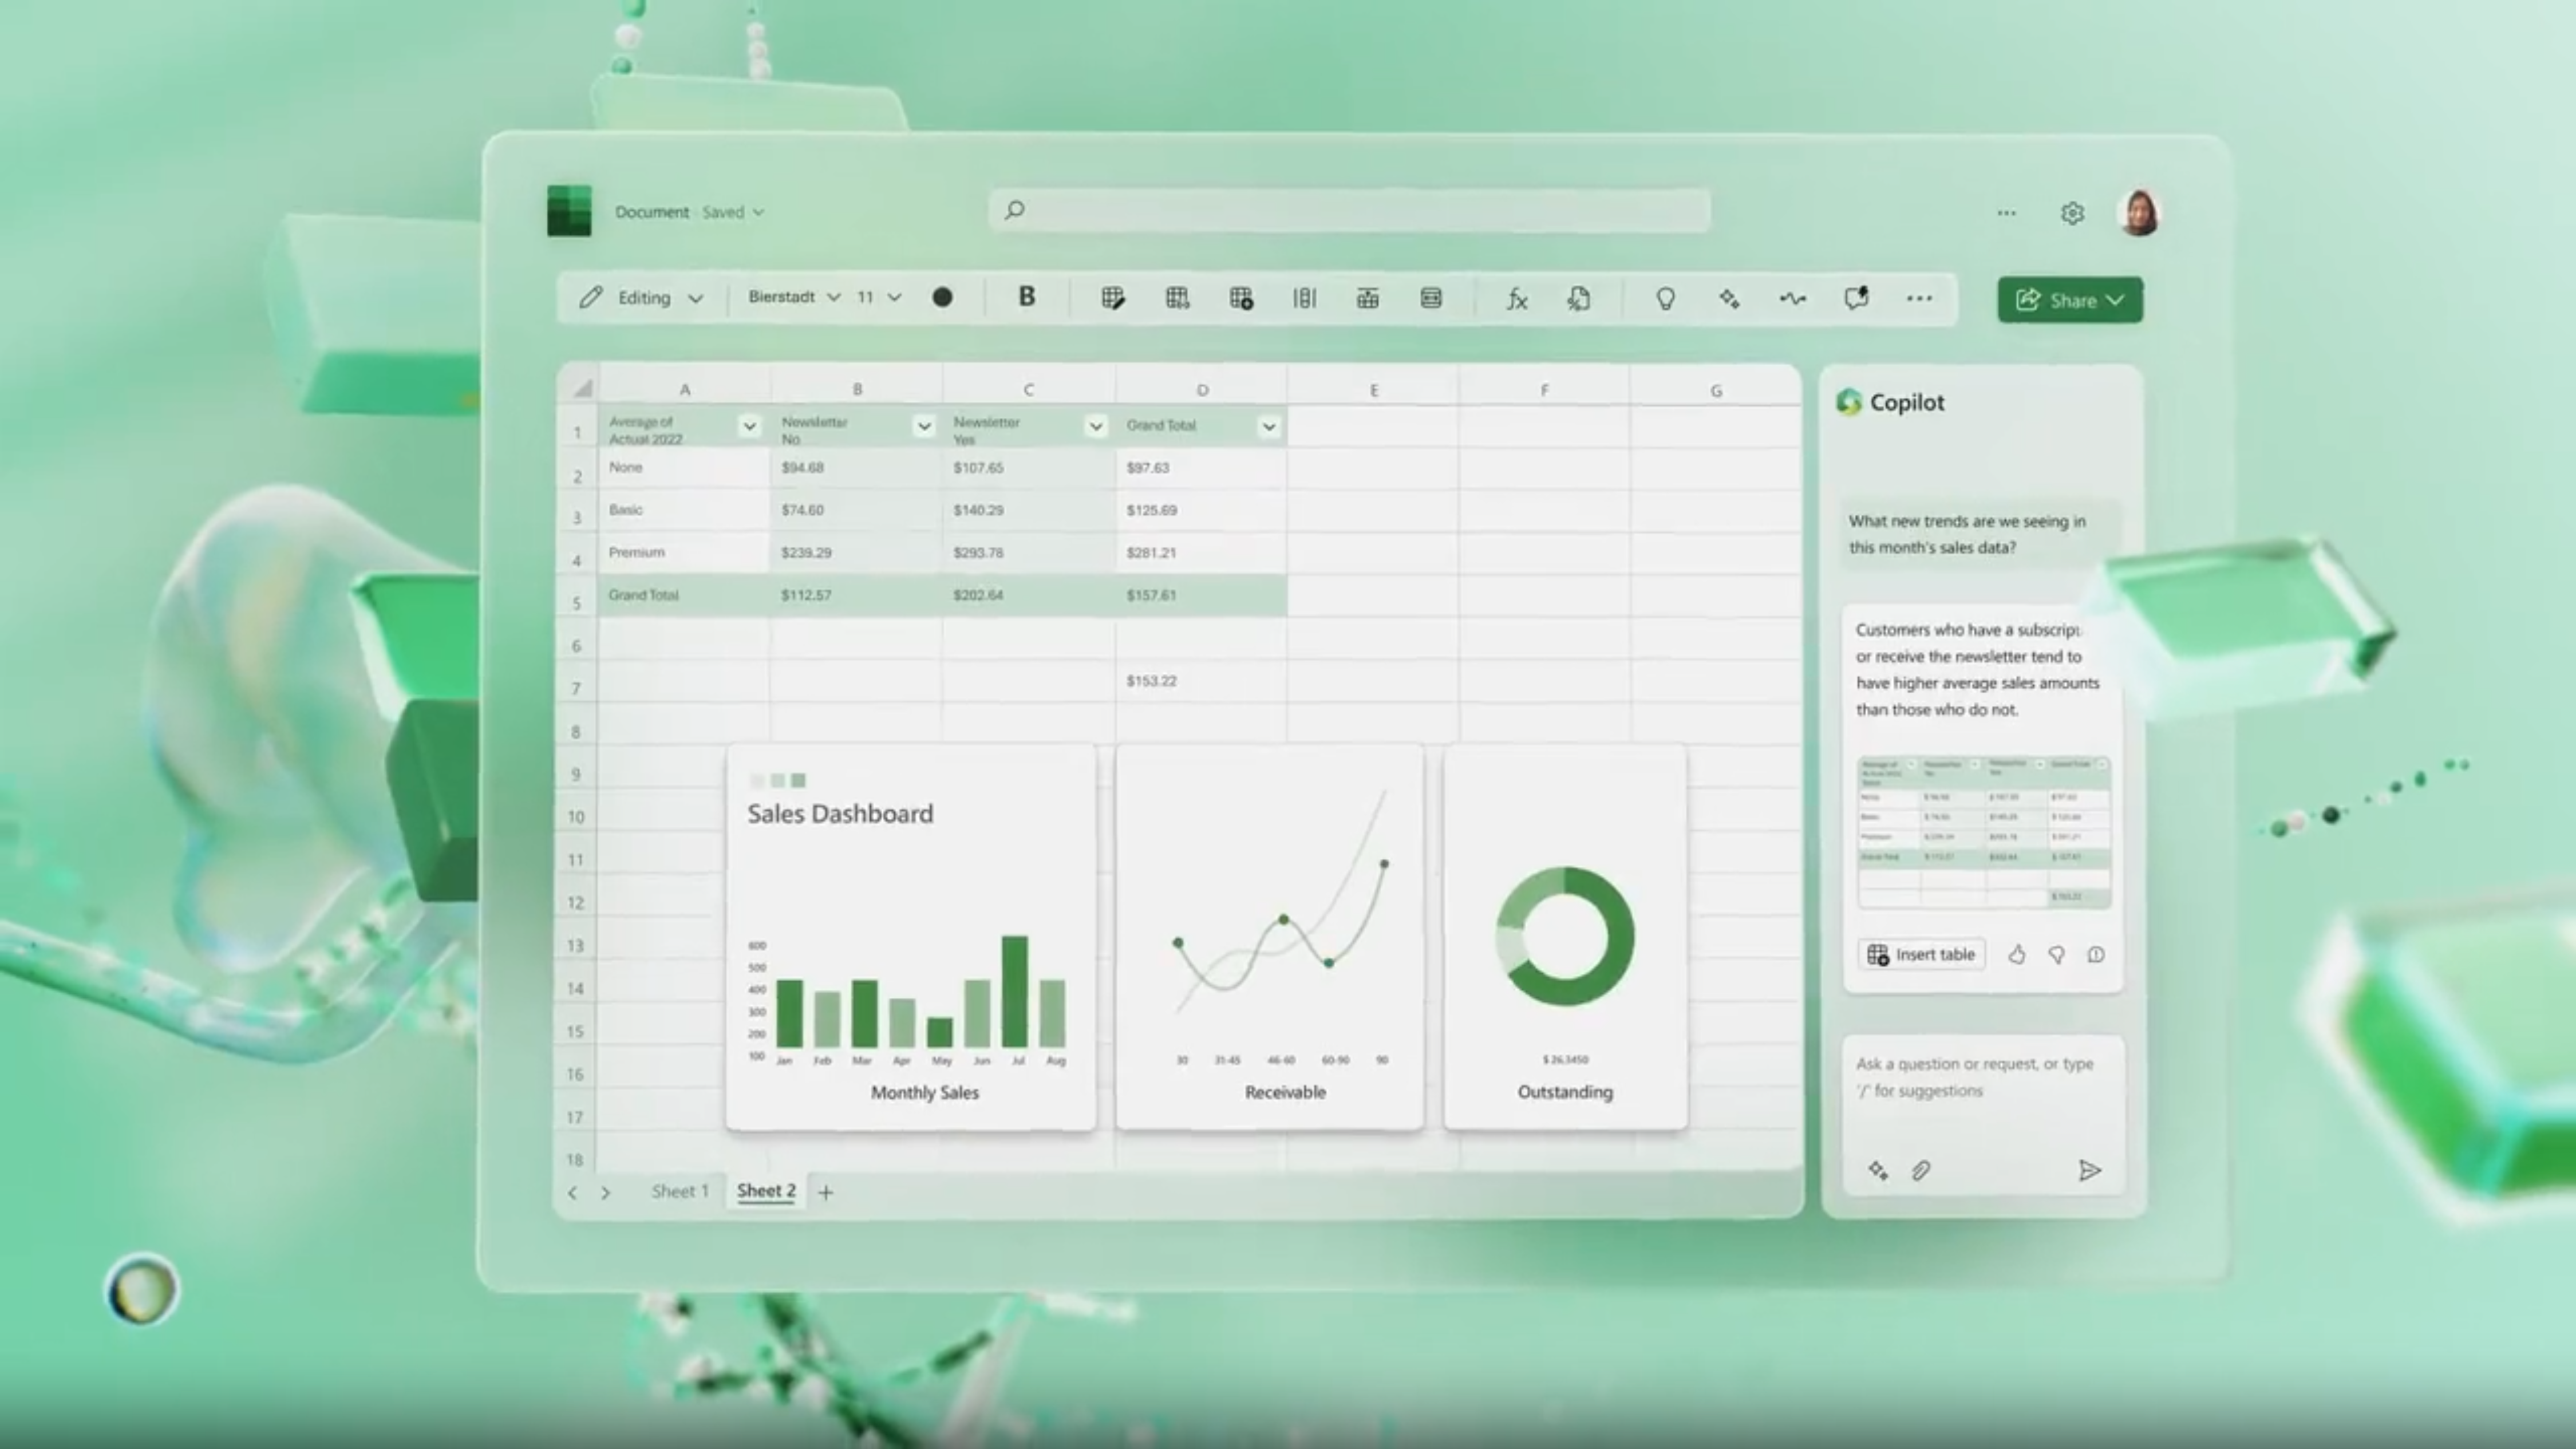 Microsoft Excel Software - 2023 Reviews, Pricing & Demo